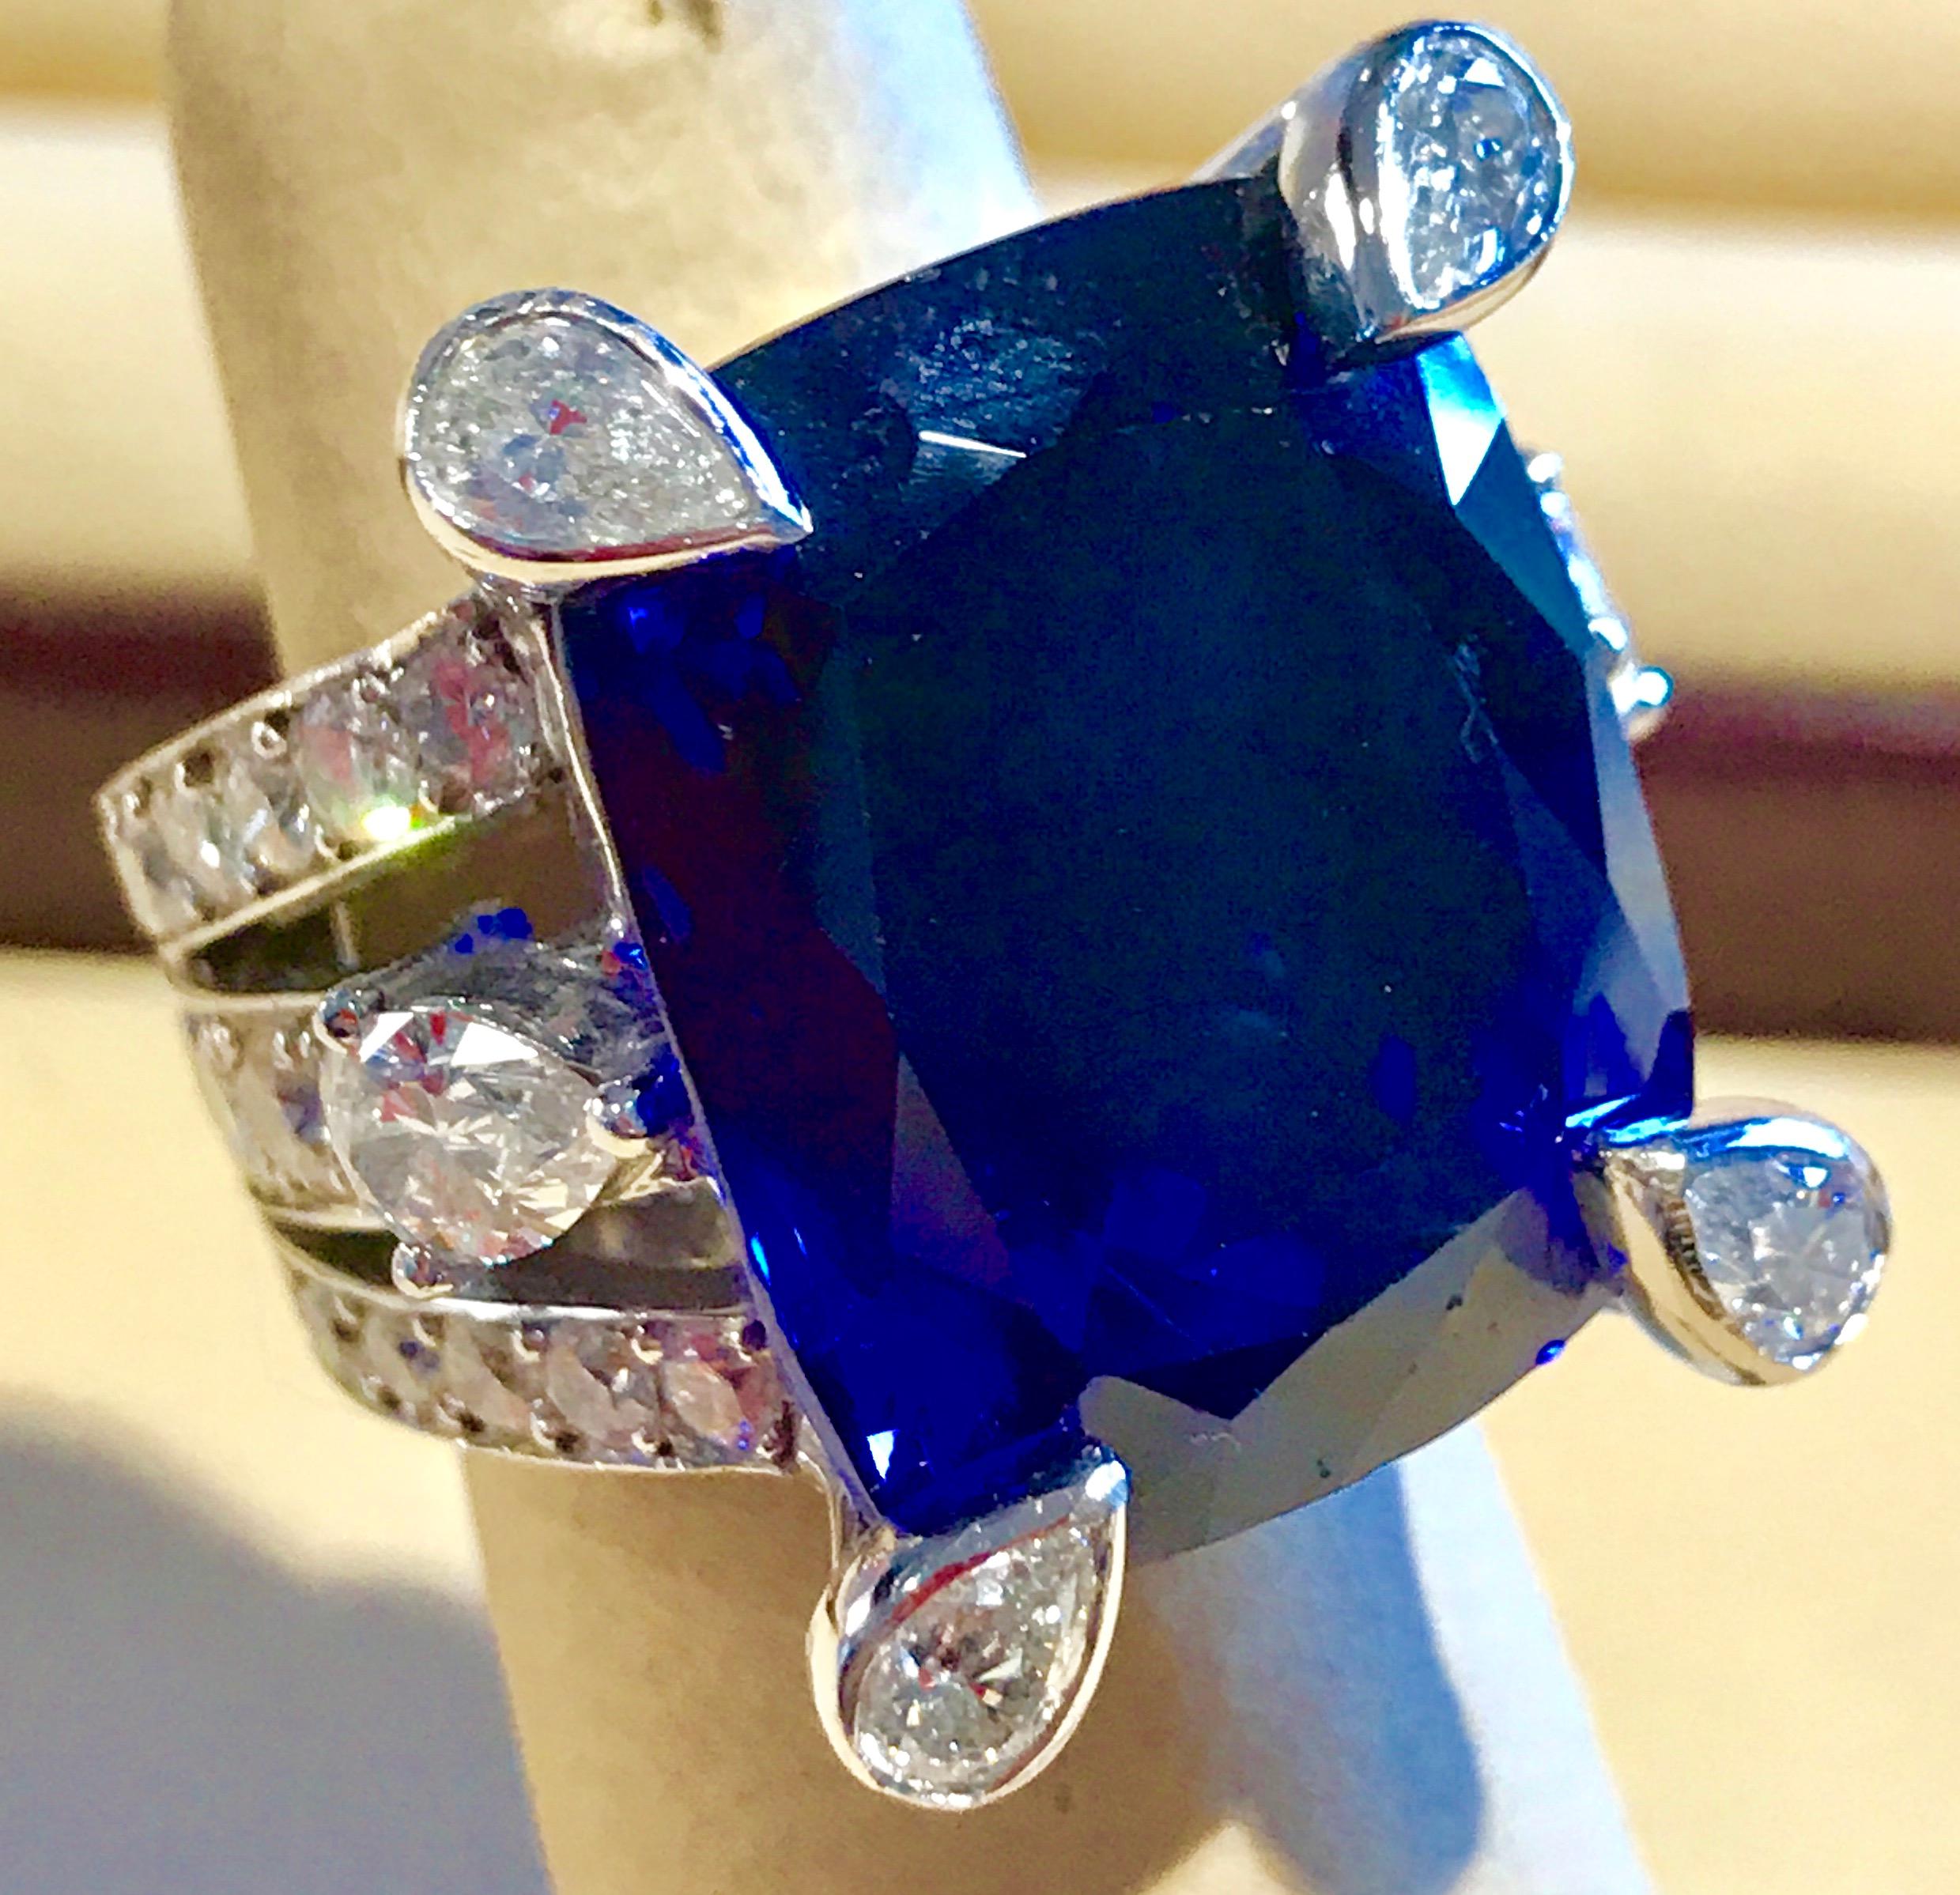 AGL Certified Natural 35.12 Carat Cushion-Cut Tanzanite Ring  4.5 Carat Diamonds
18 Karat white gold 26 gm
This extraordinary, 35.12 carat tanzanite is truly an extraordinary gemstone. There are  total  of 4.5 carats of shimmering white diamonds,